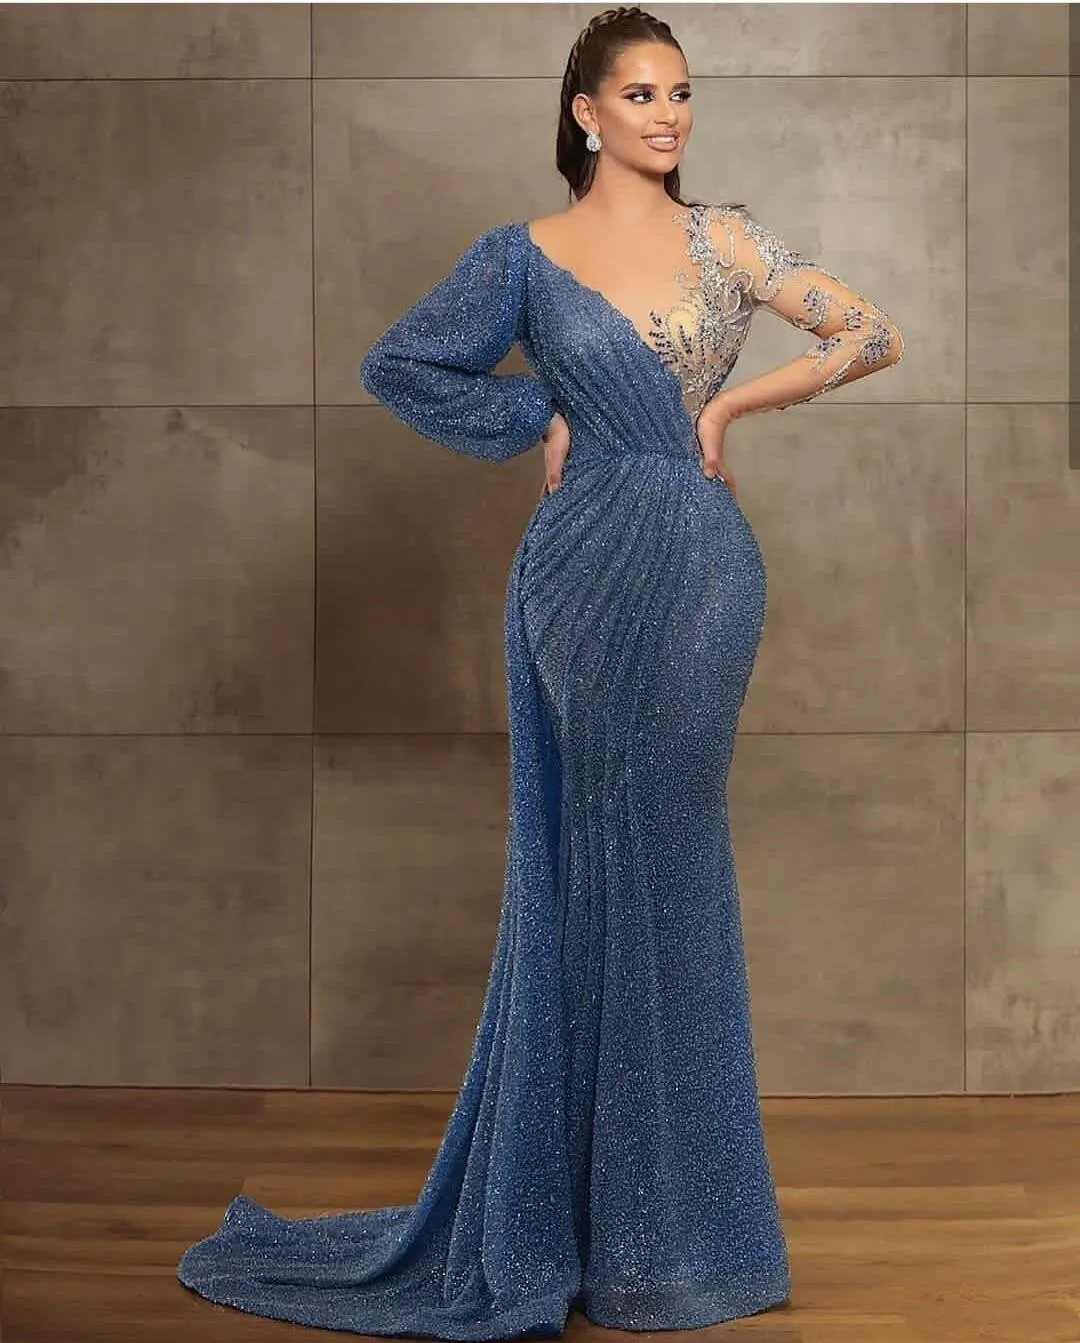 

Blue Evening Gowns Sheer Jewel Neck Beaded Lace Long Sleeve Mermaid Prom Dress Sweep Train Illusion Robes De Soirée فساتين السهر